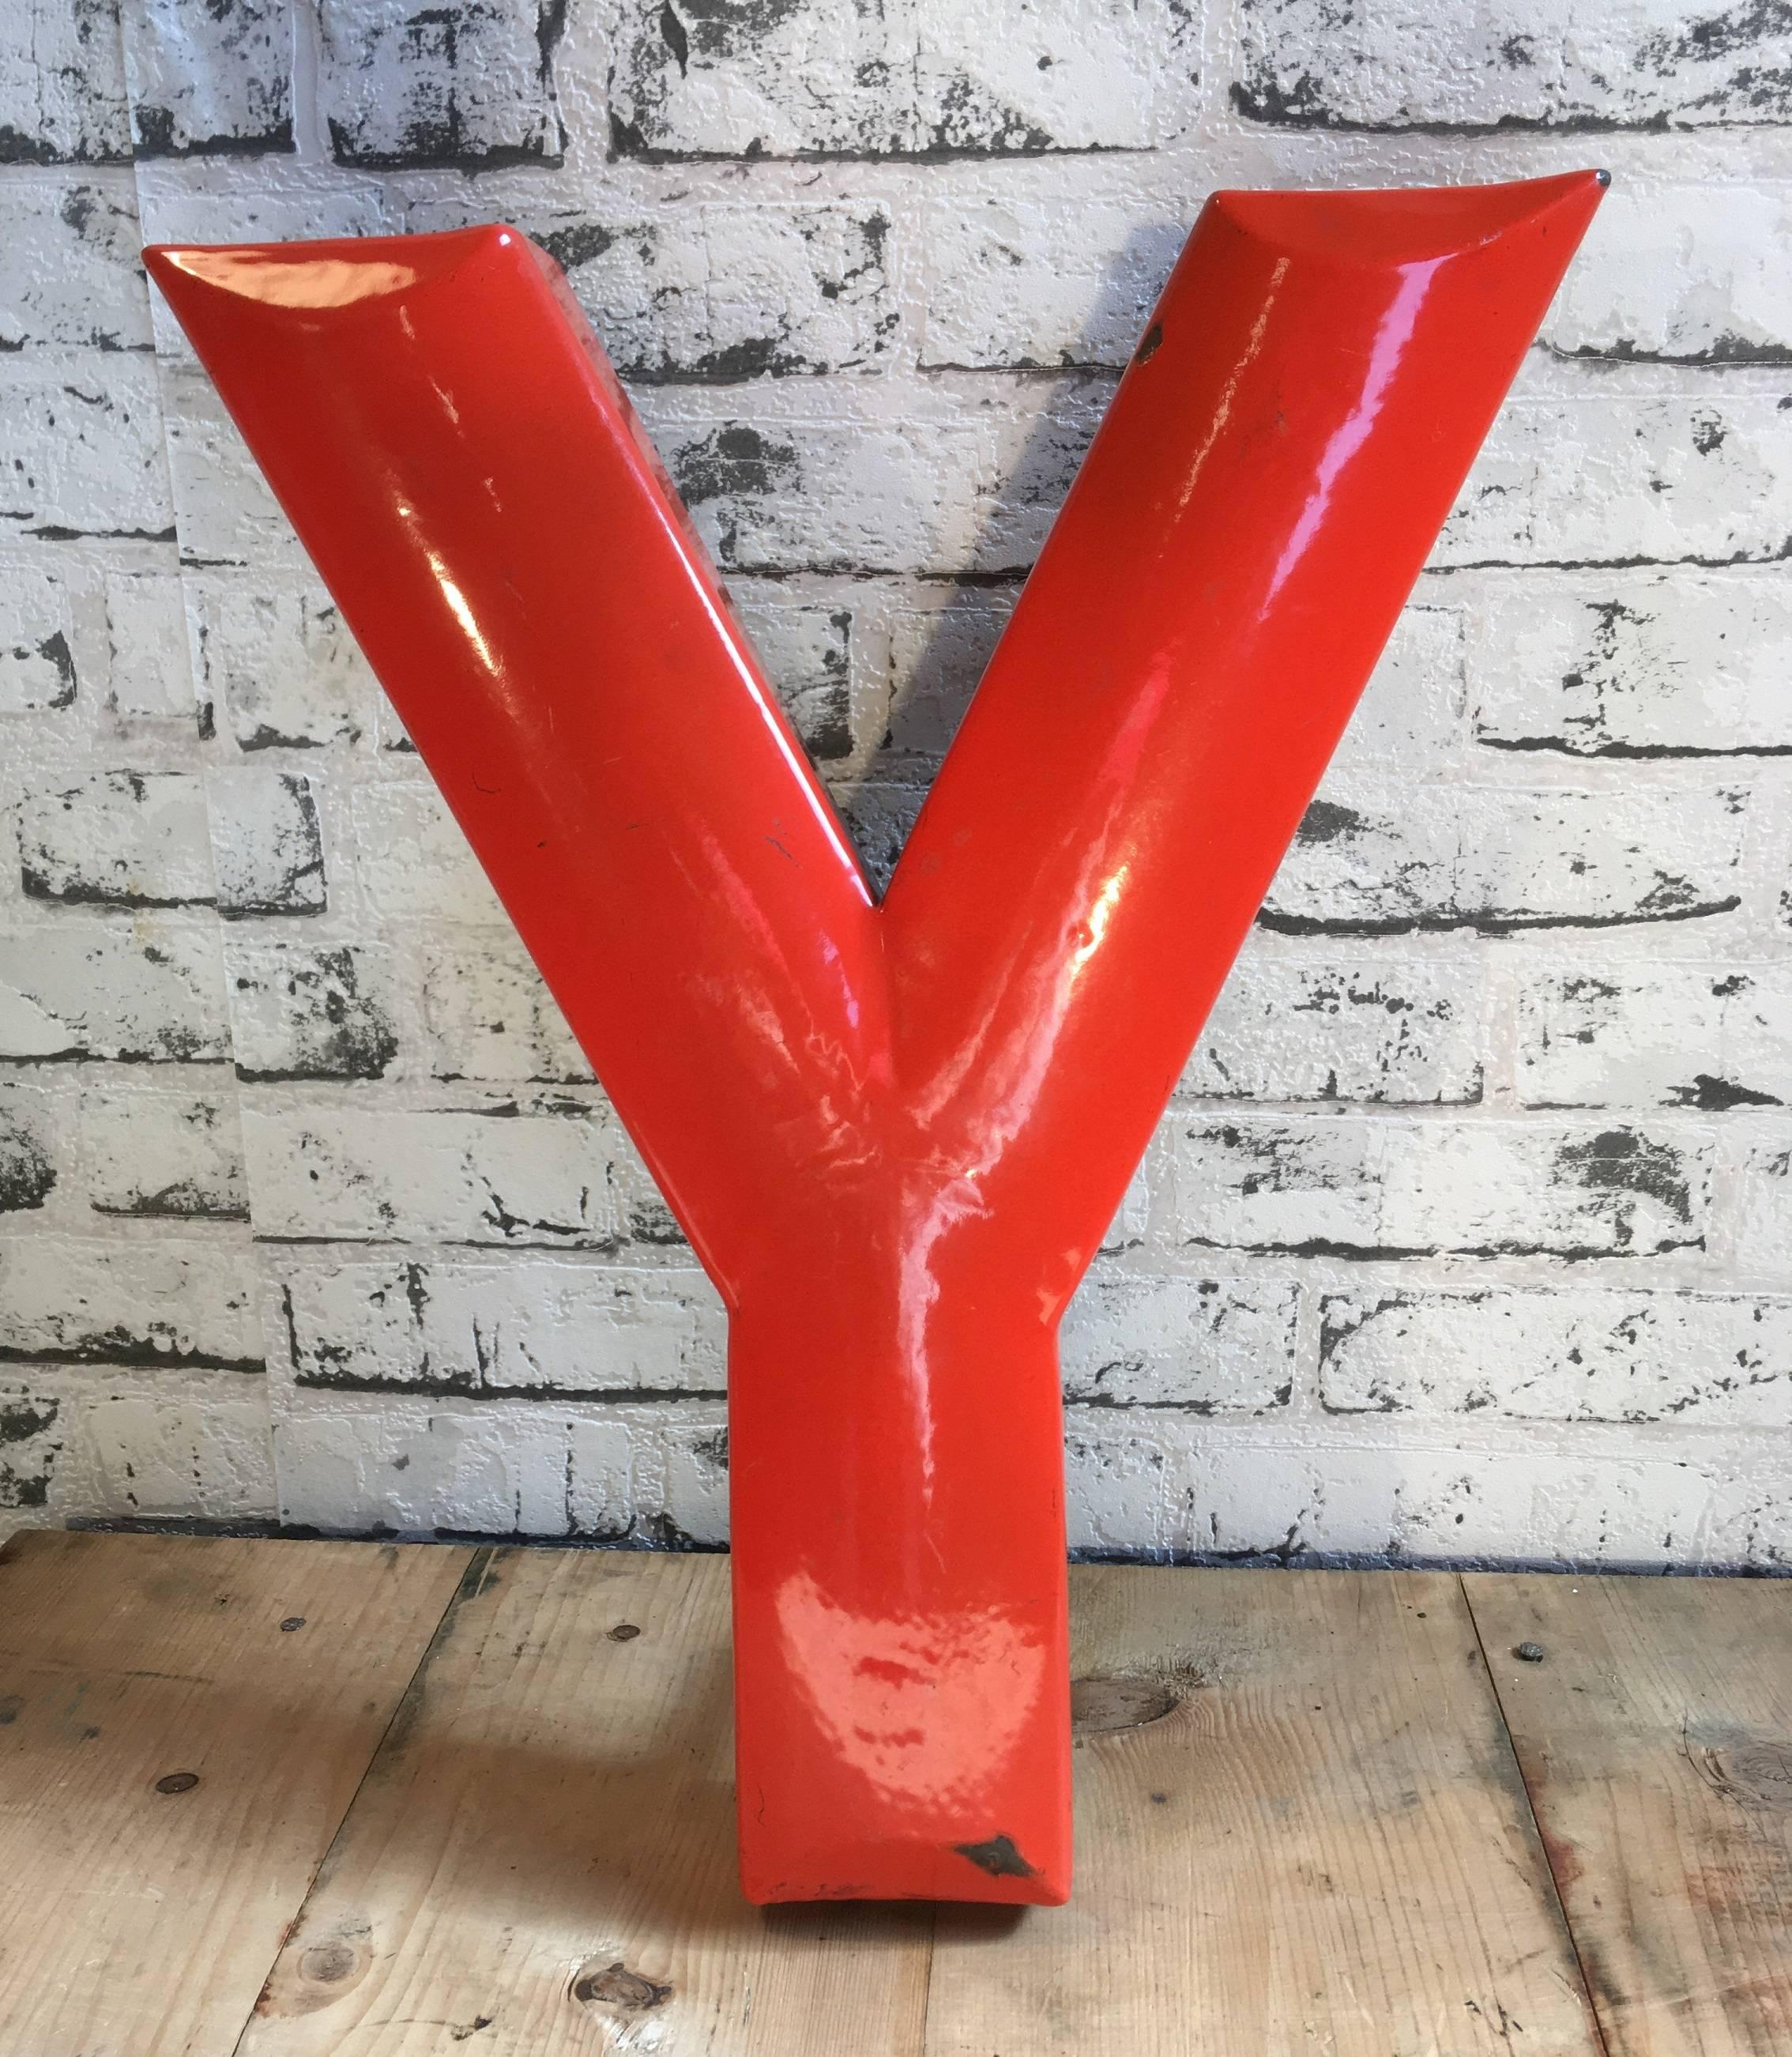 This industrial vintage letter 'Y' was manufactured in former Czechoslovakia, 1930s. Comes from an old advertisement.
Letter is made from enameled iron.